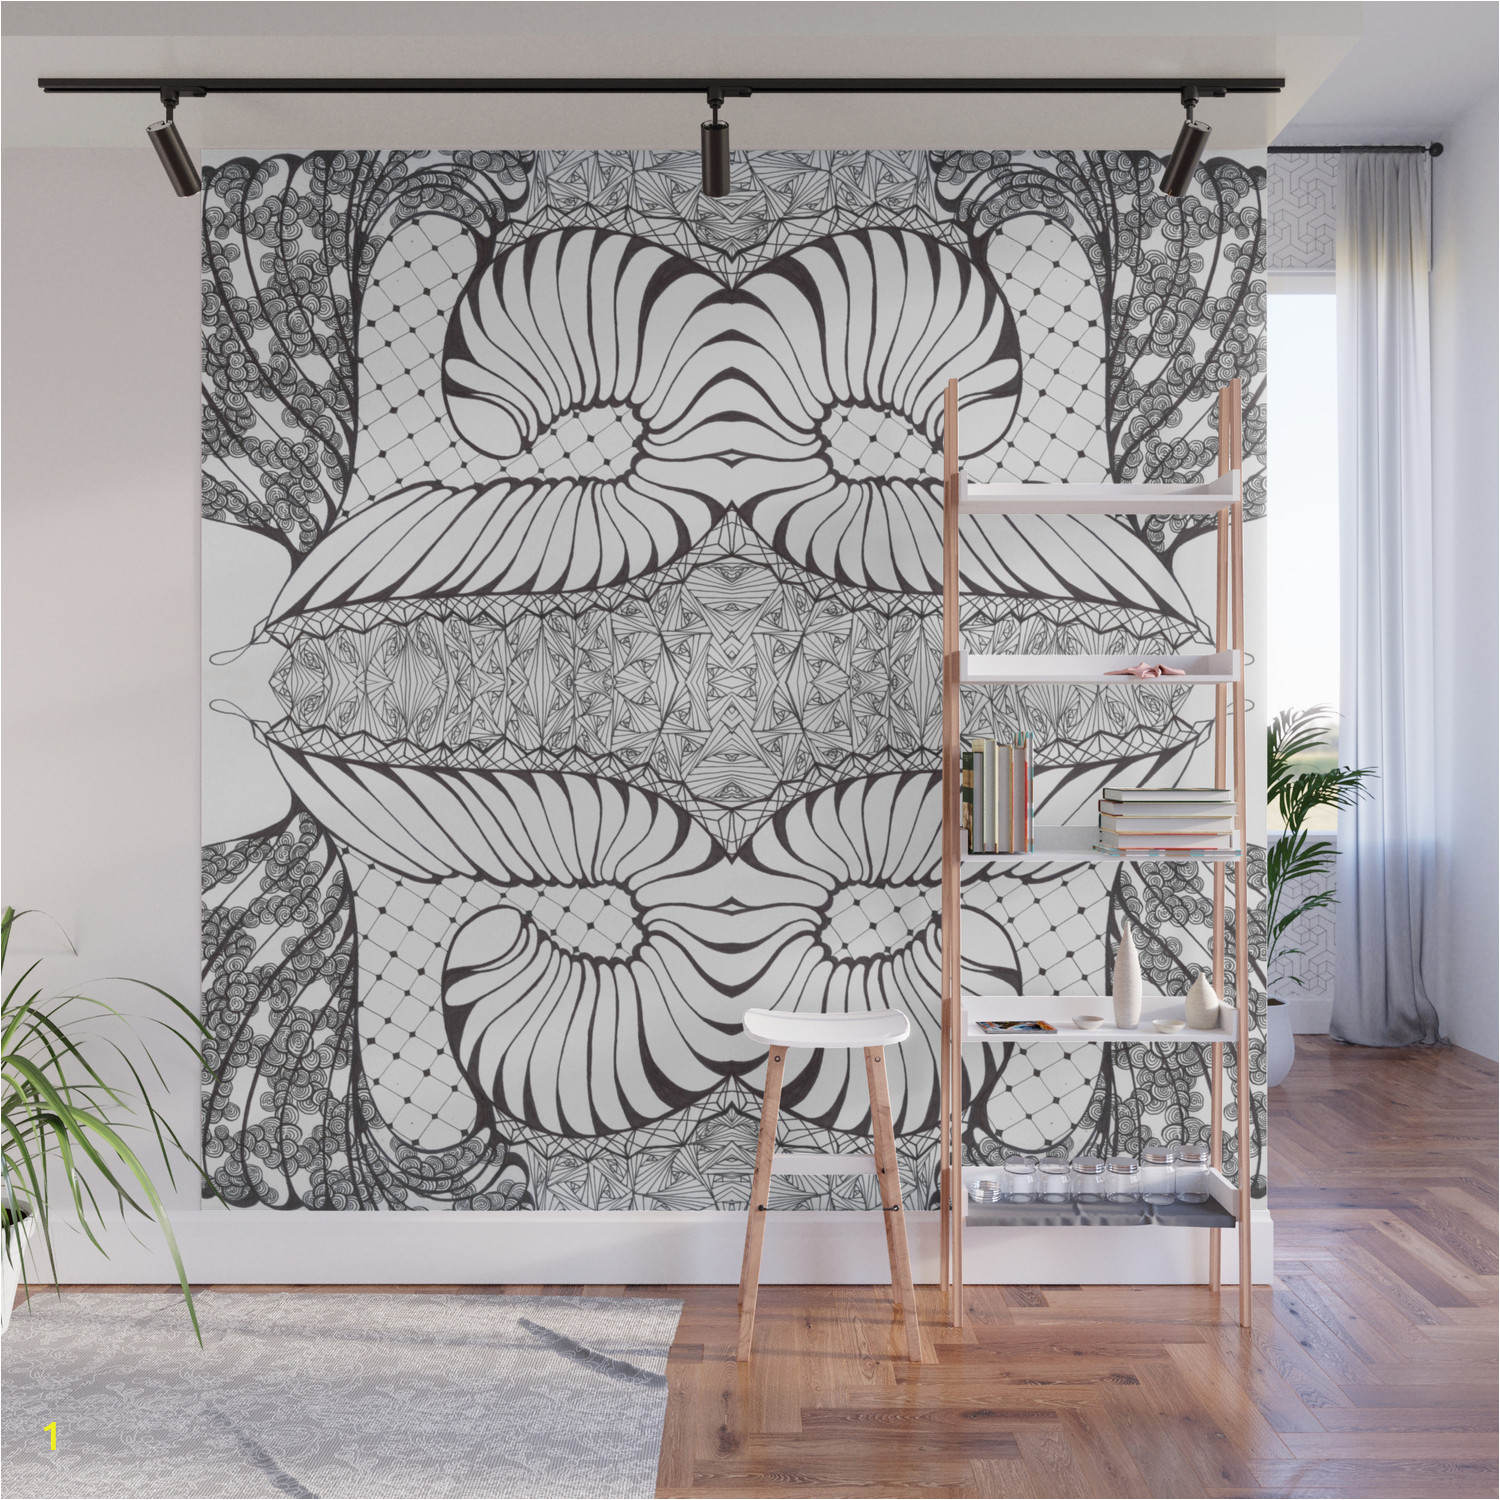 Black and White Wall Murals for Cheap Black and White Zen Doodle Wall Mural